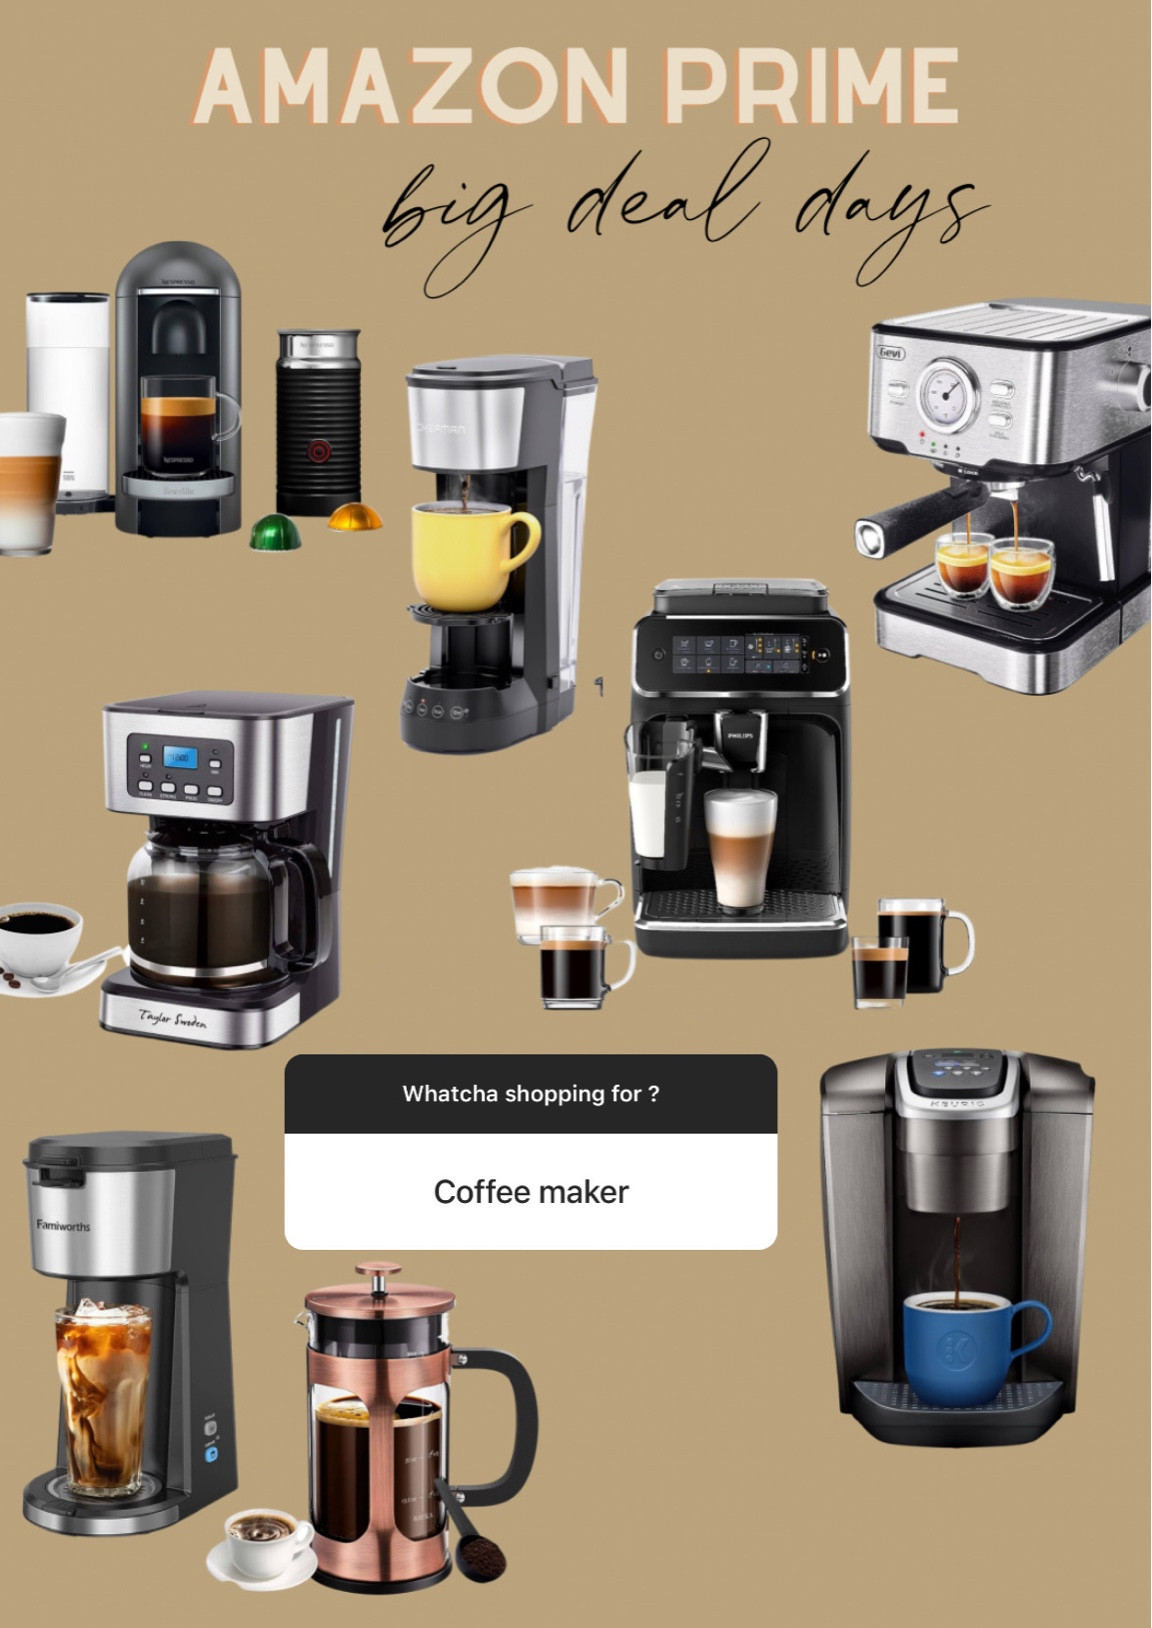  Famiworths Hot and Iced Coffee Maker for K Cups and